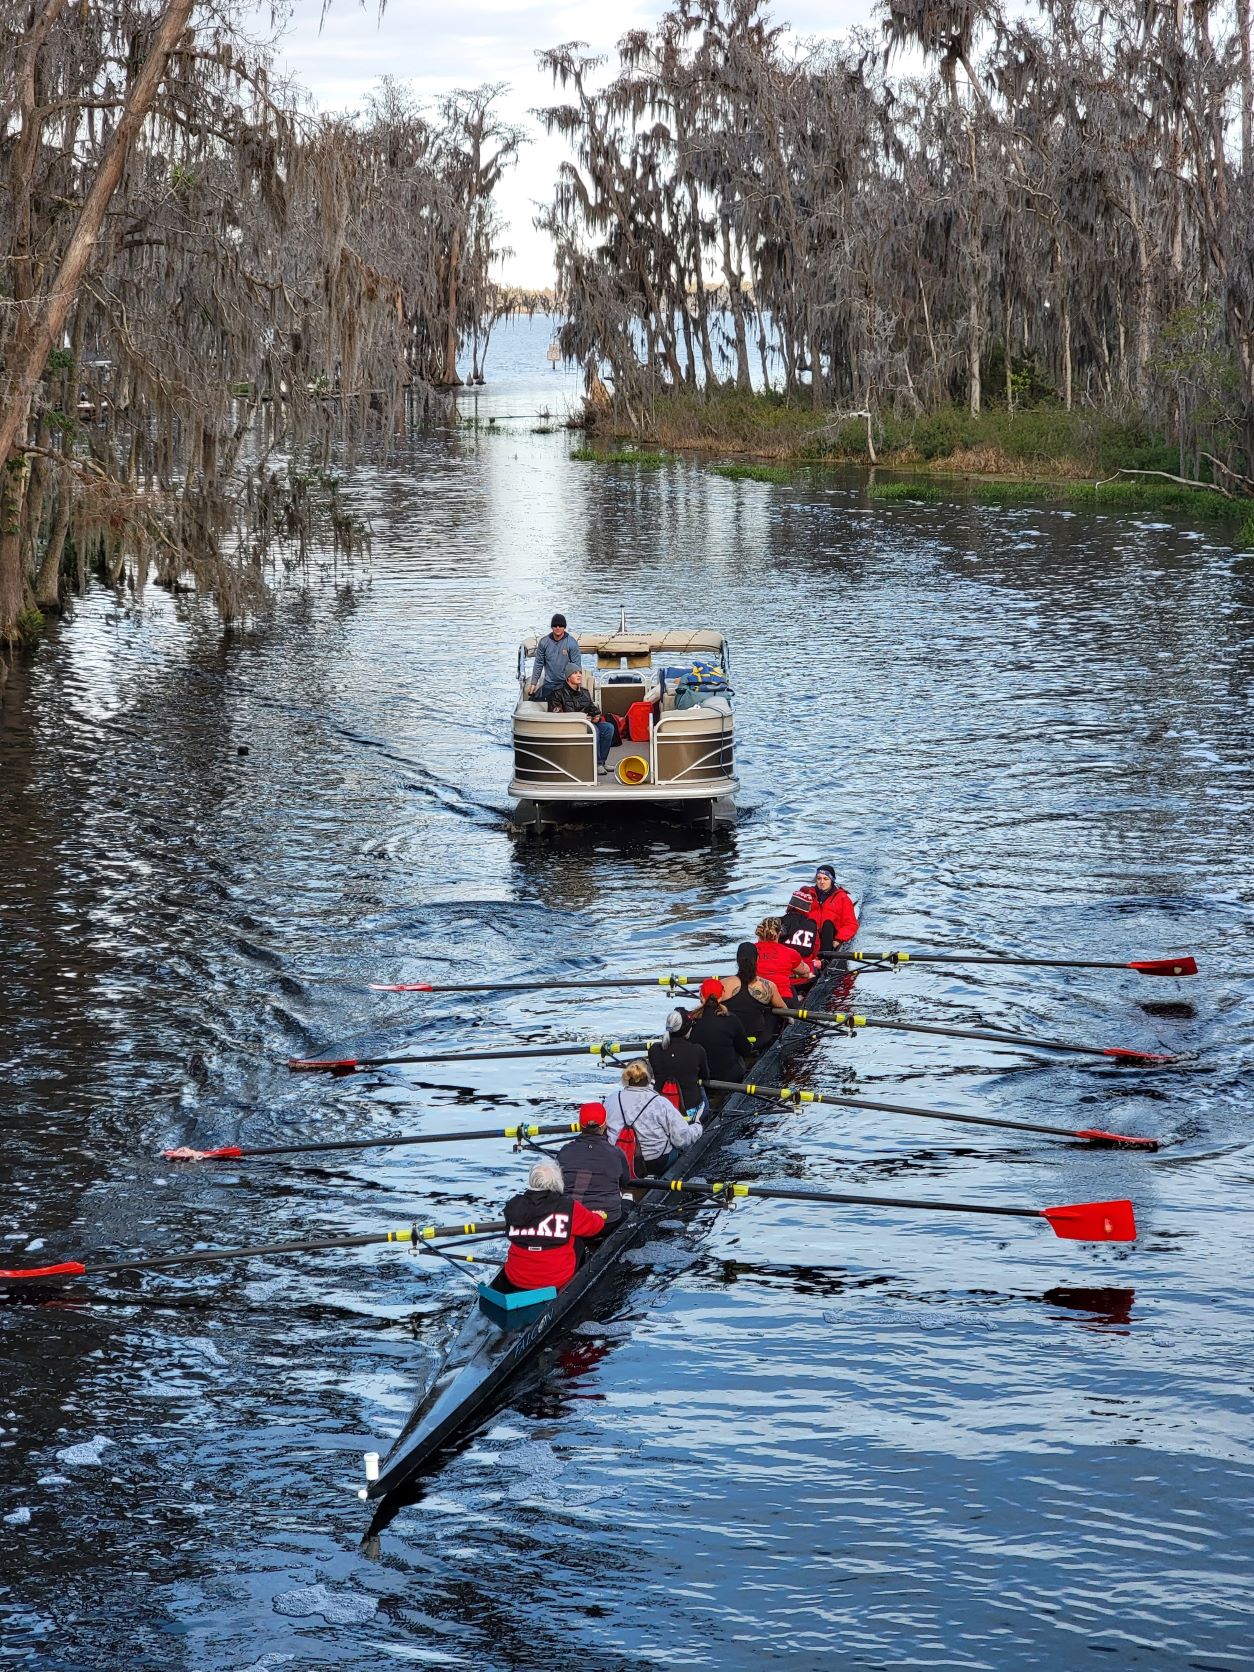 Rowers synchronize efforts to navigate life